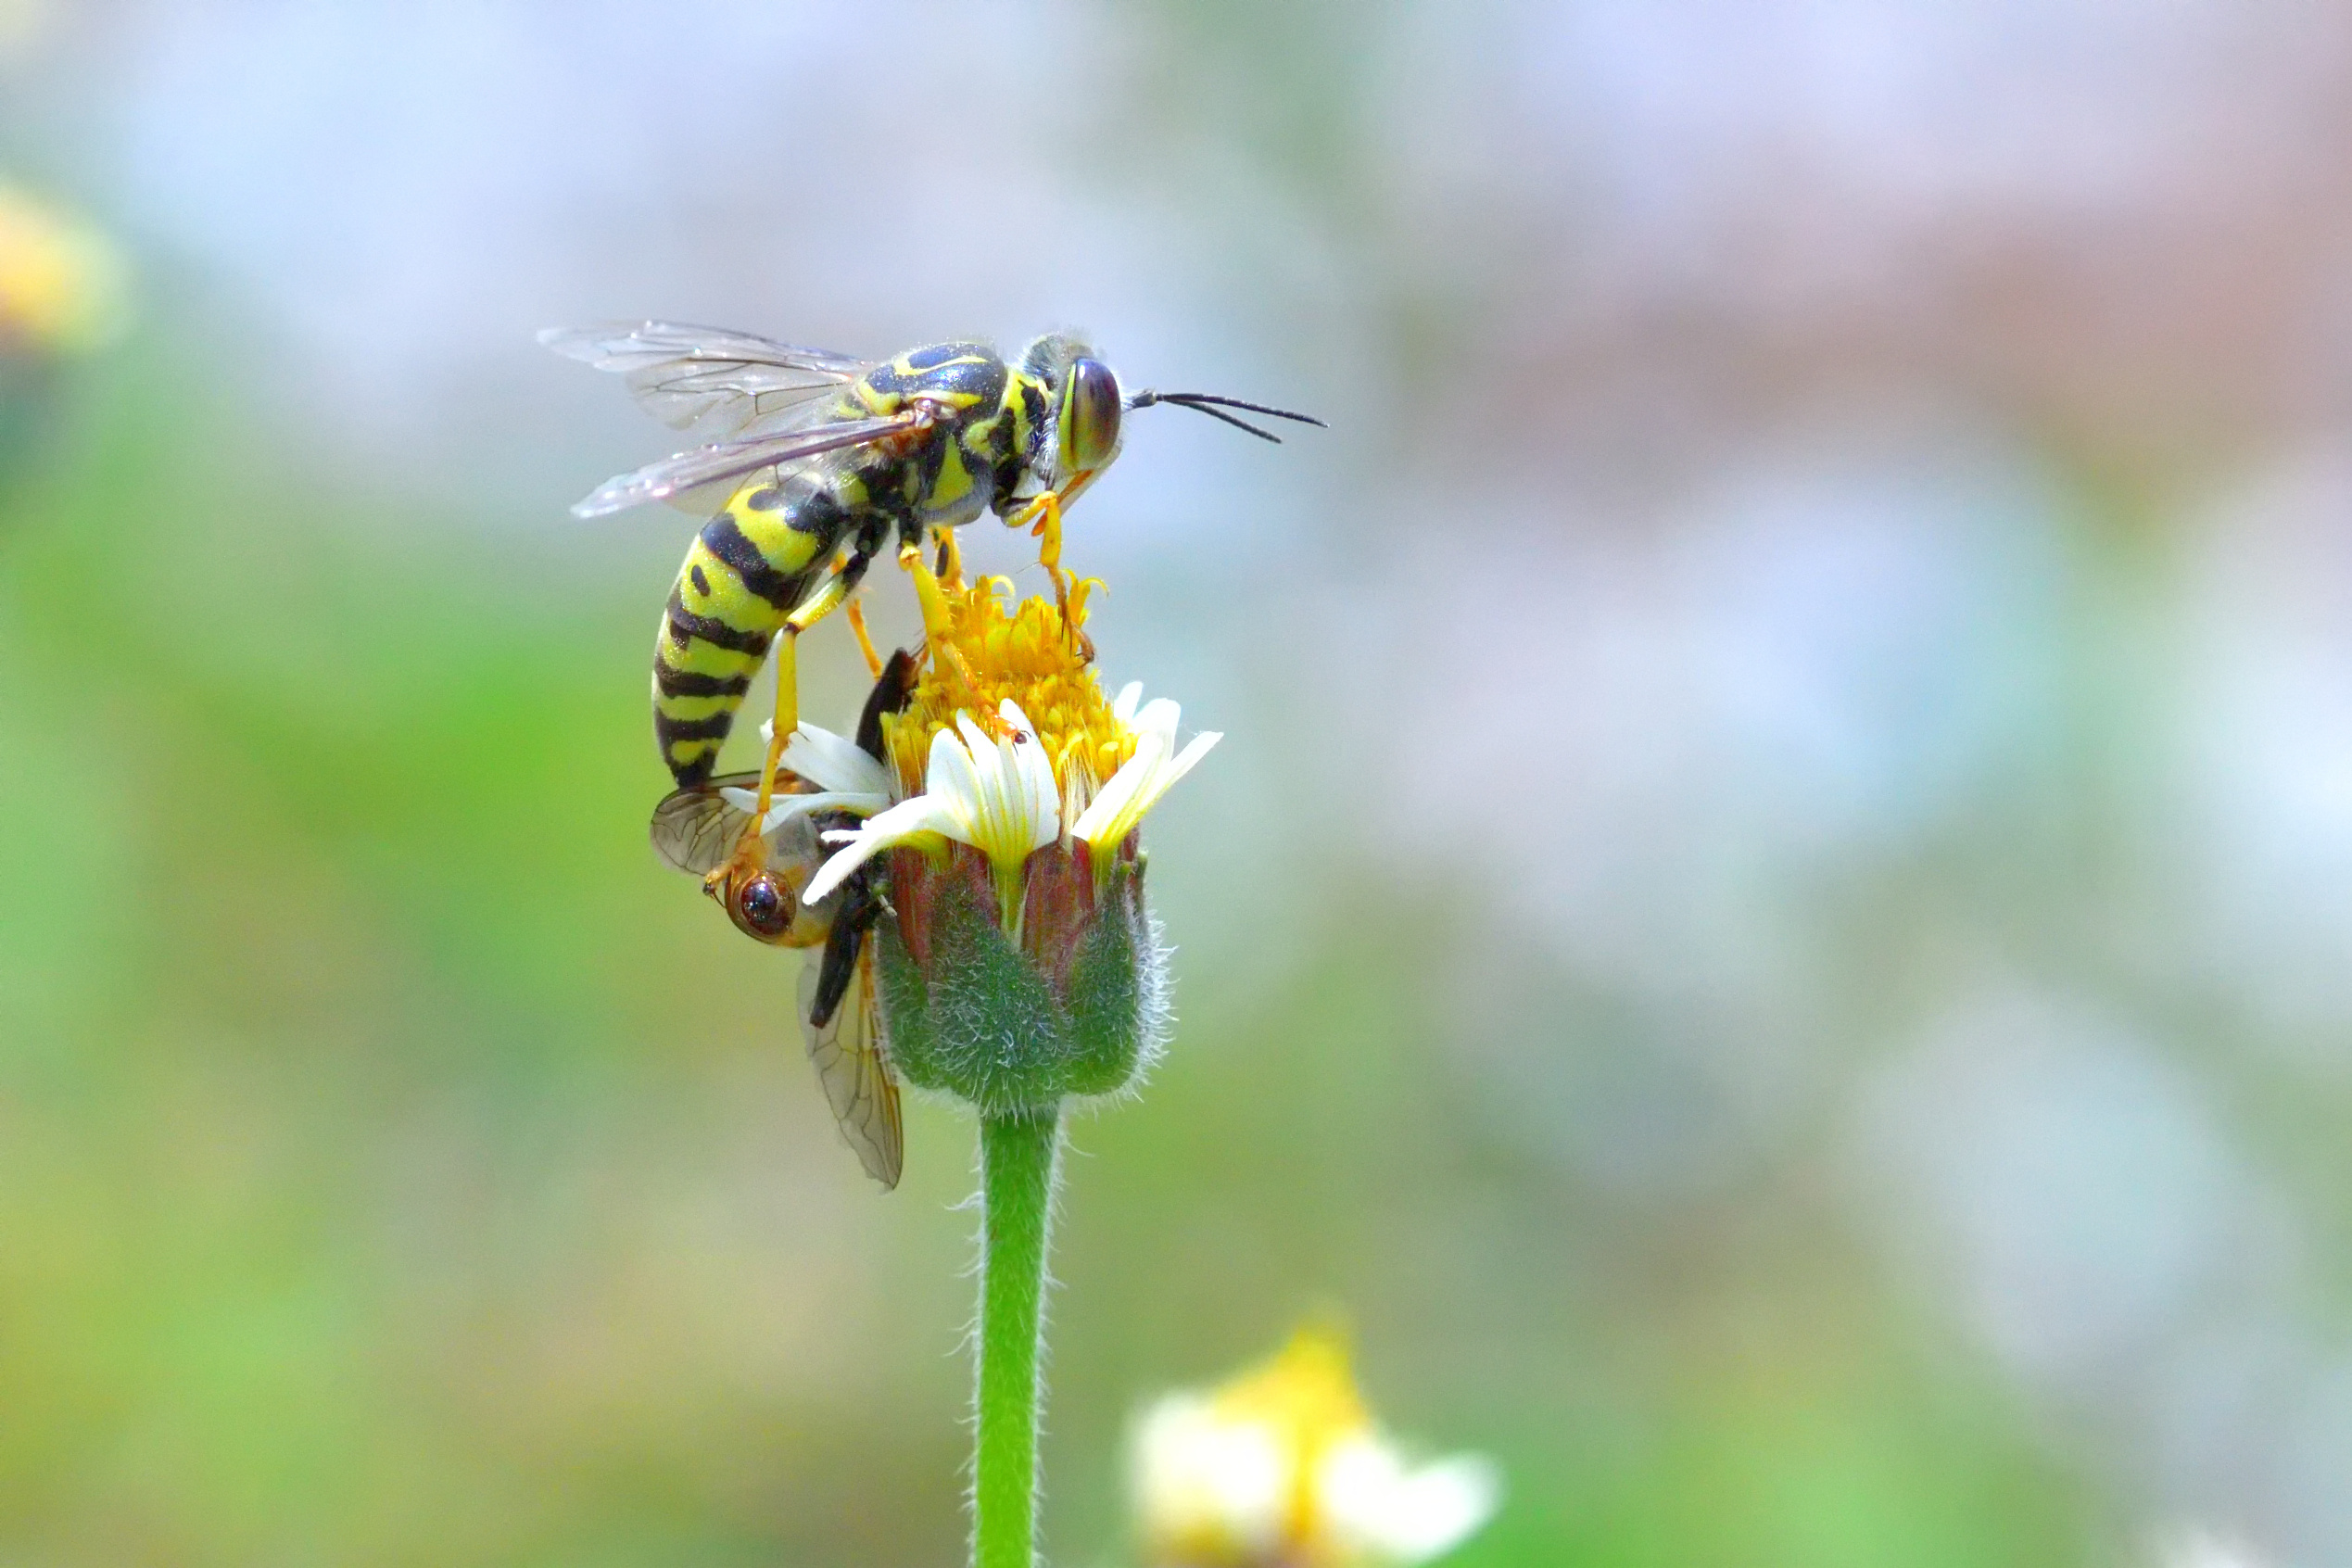 An image of a yellow jacket on a flower - we offer professional yellow jacket removal services in Temple, TX.